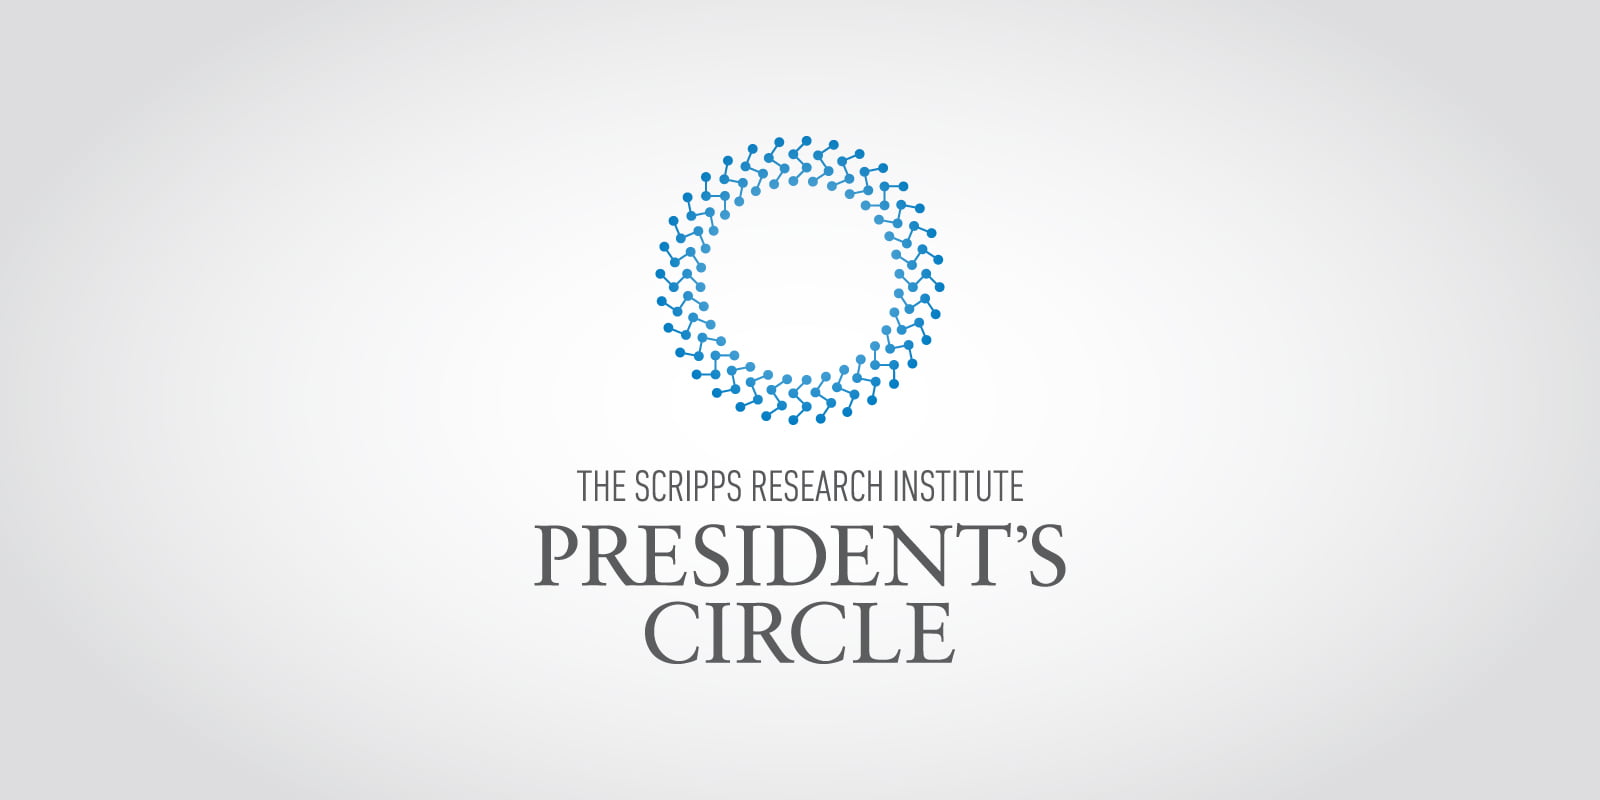 The Scripps Research Institute President's Circle logo